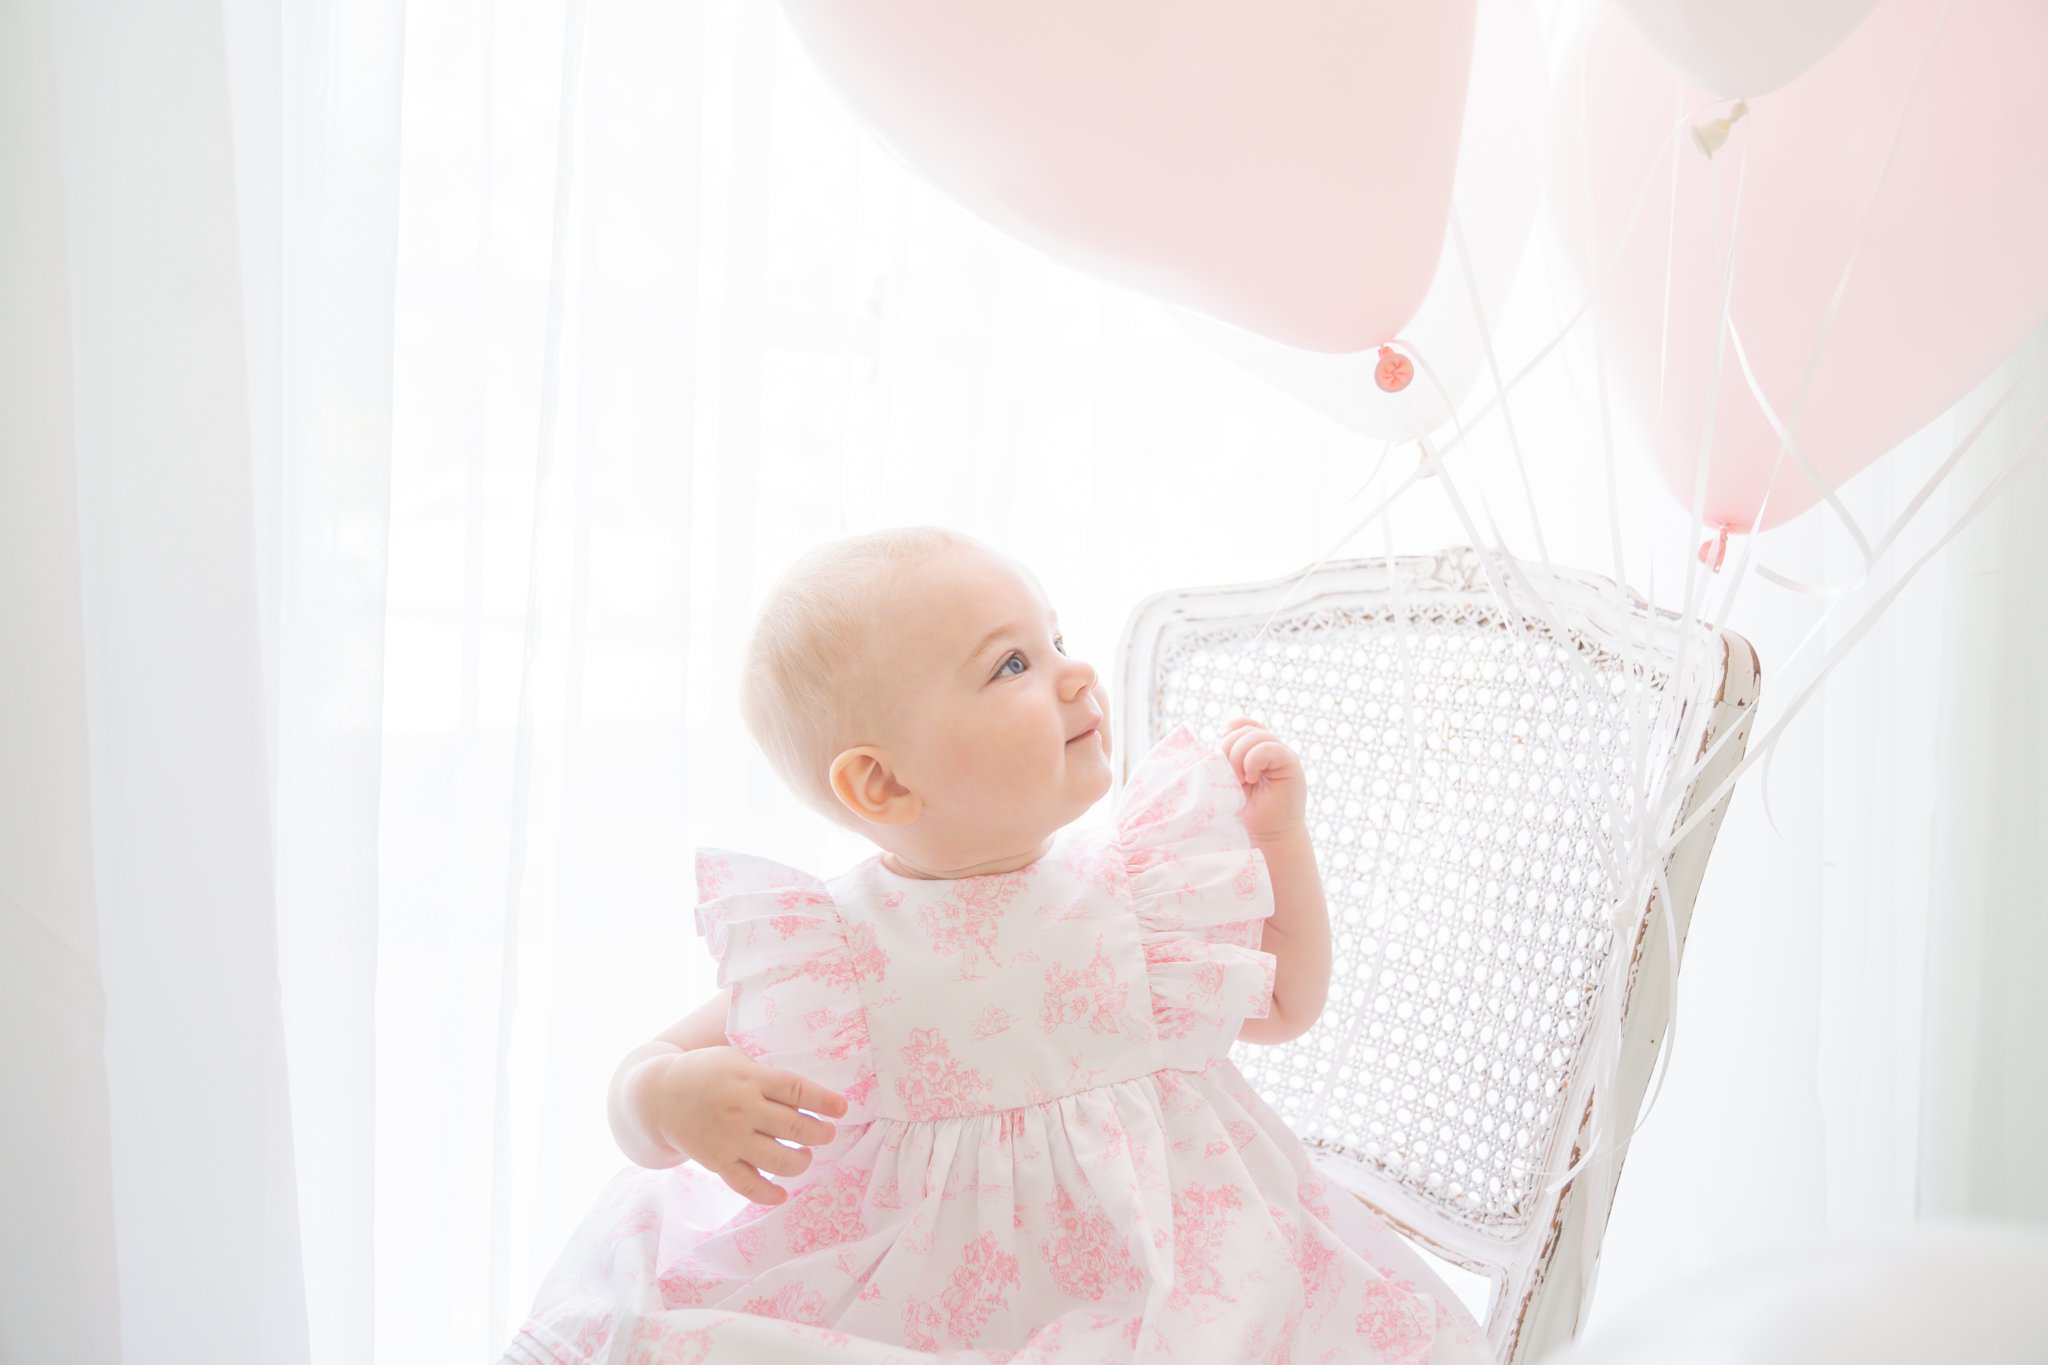 Birthday baby with pink and white toille dress sitting on a vintage chair in a room full of balloons